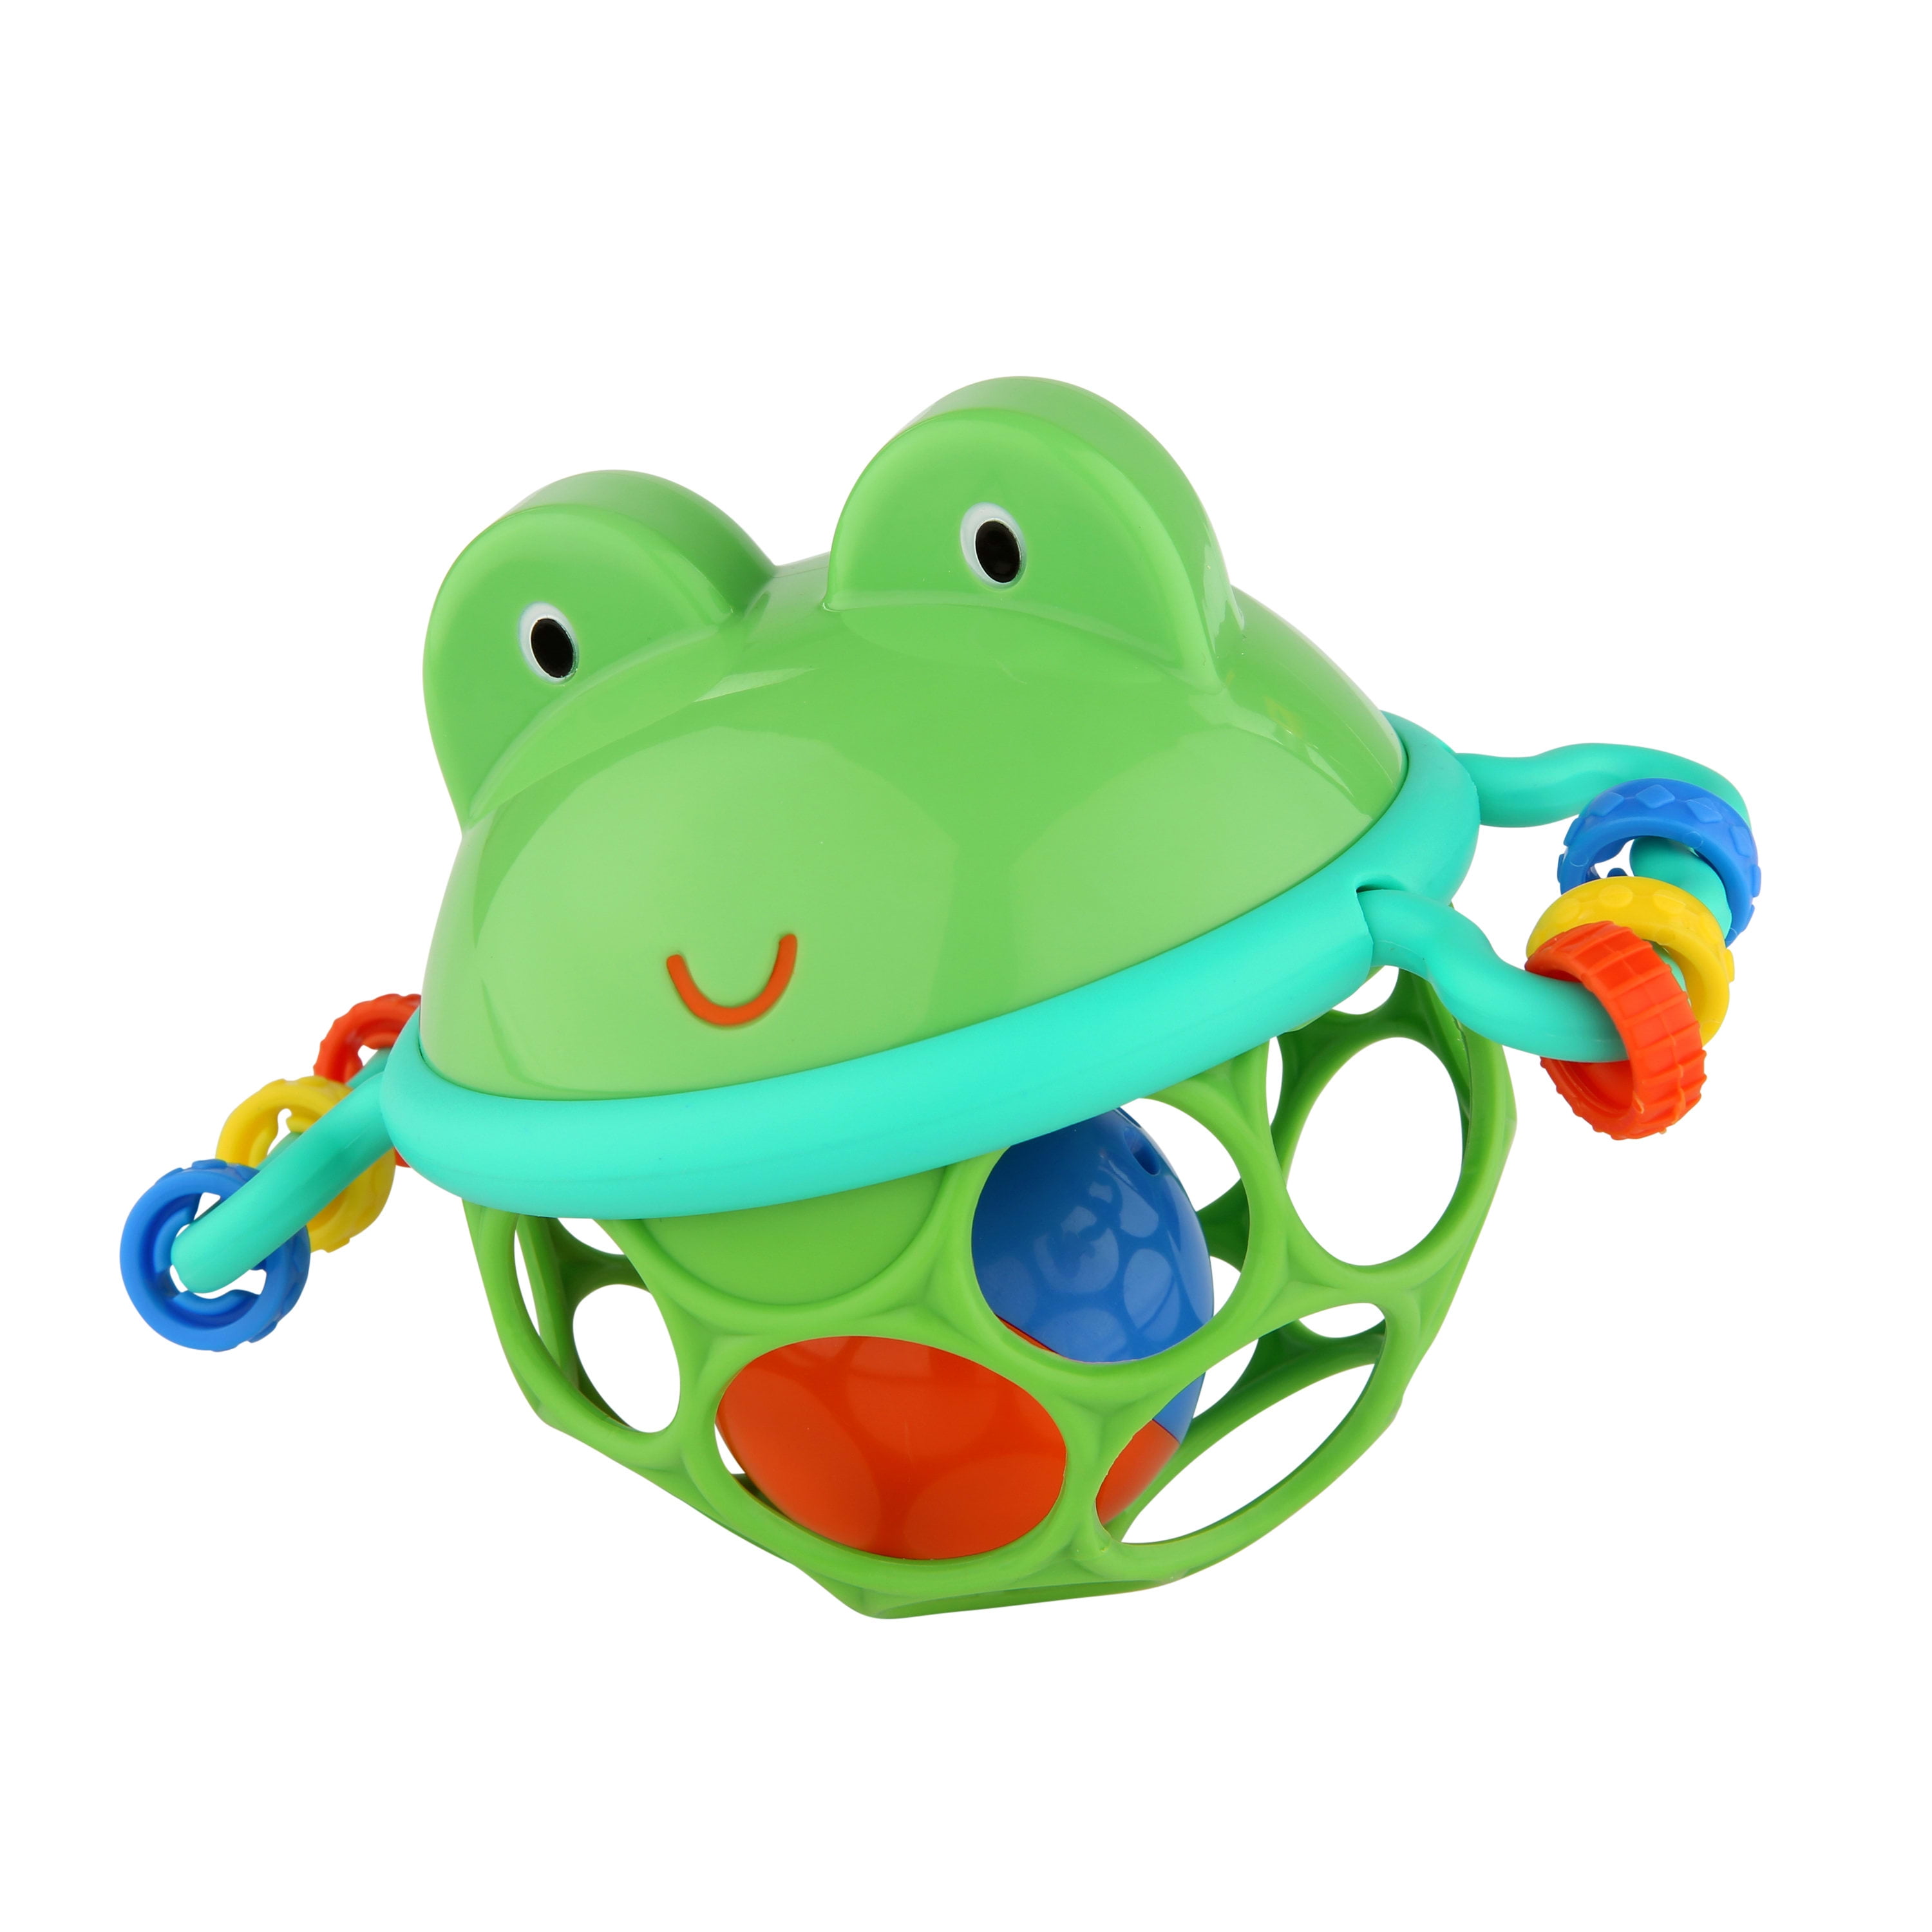 Bright Starts Oball Froggy Musical Toy, Jingle & Shake Pal, BPA-free Easy-Grasp Baby Rattle Toy, Ages Newborn+